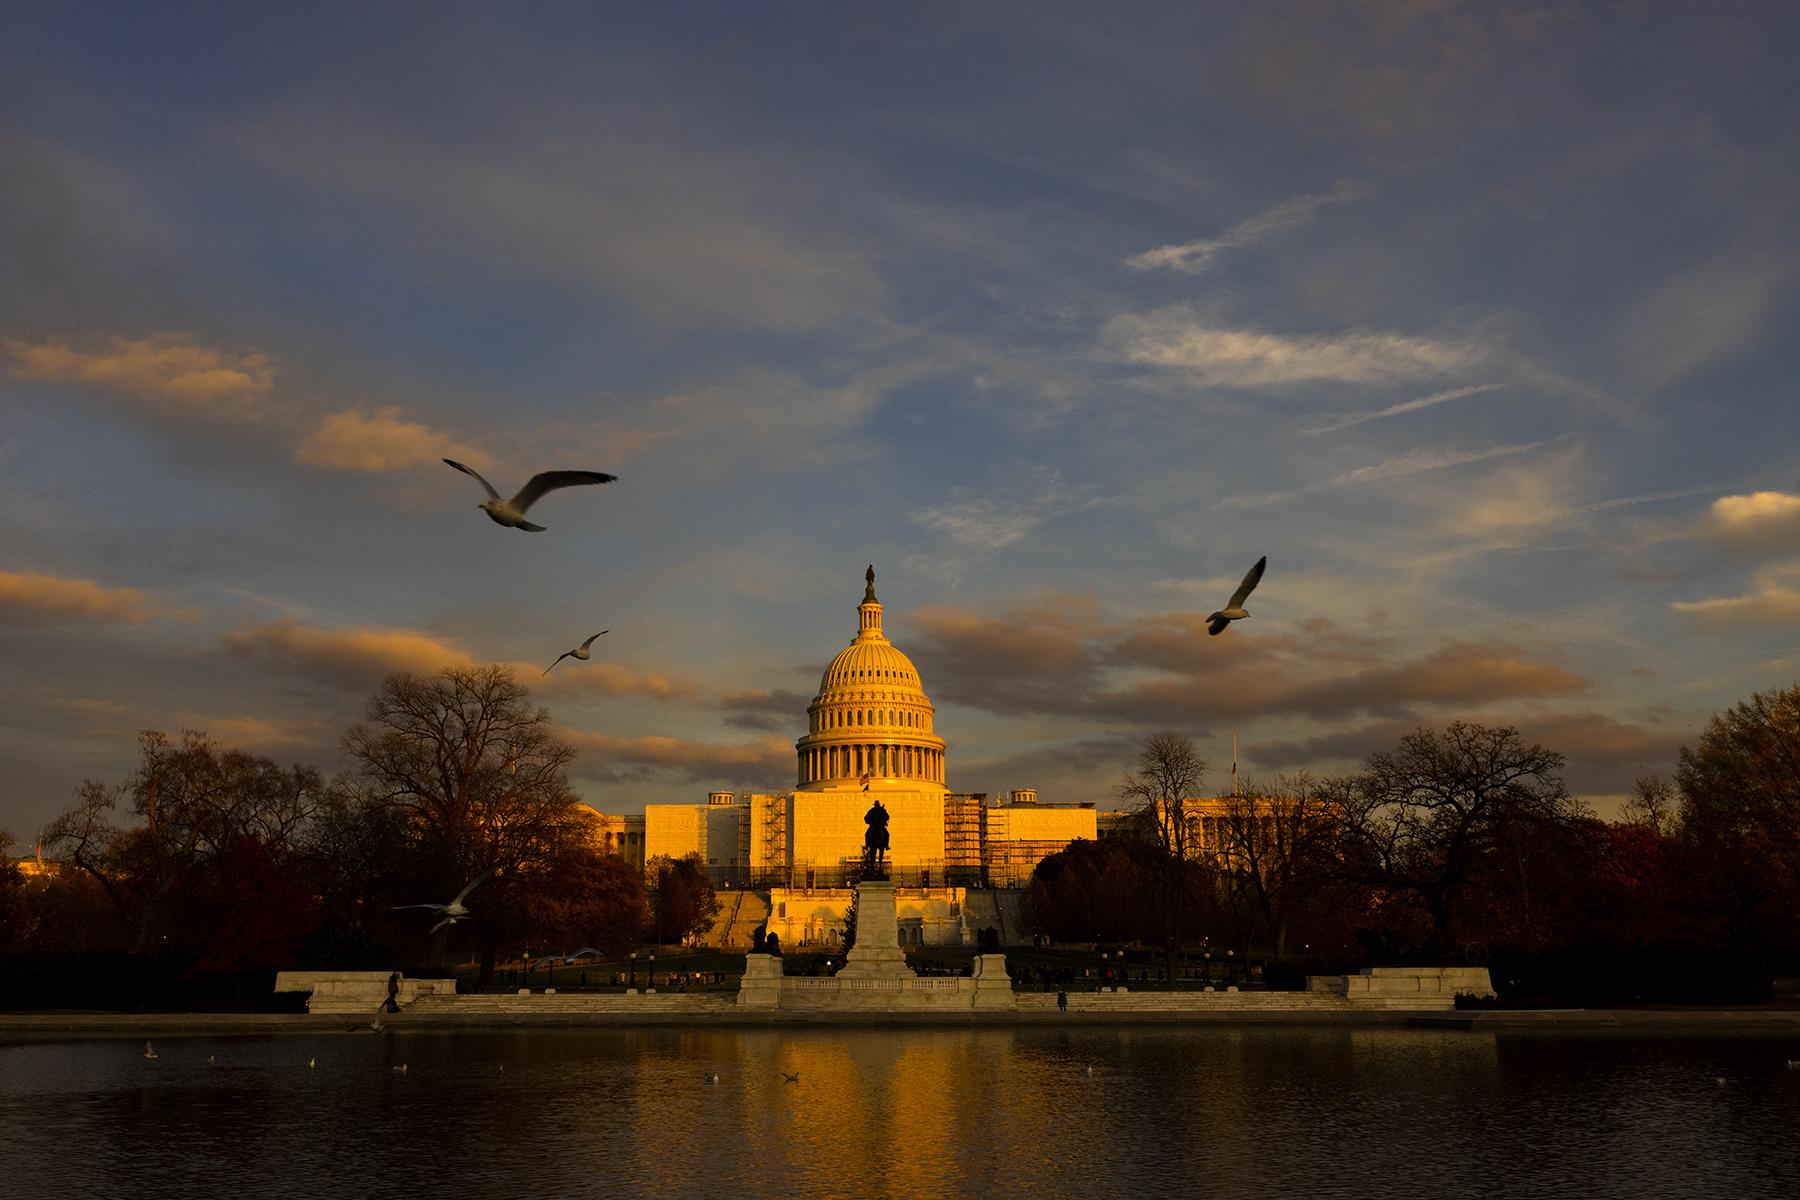 The People's House - The U.S. Capitol Building at sunset on November 19, 2022.